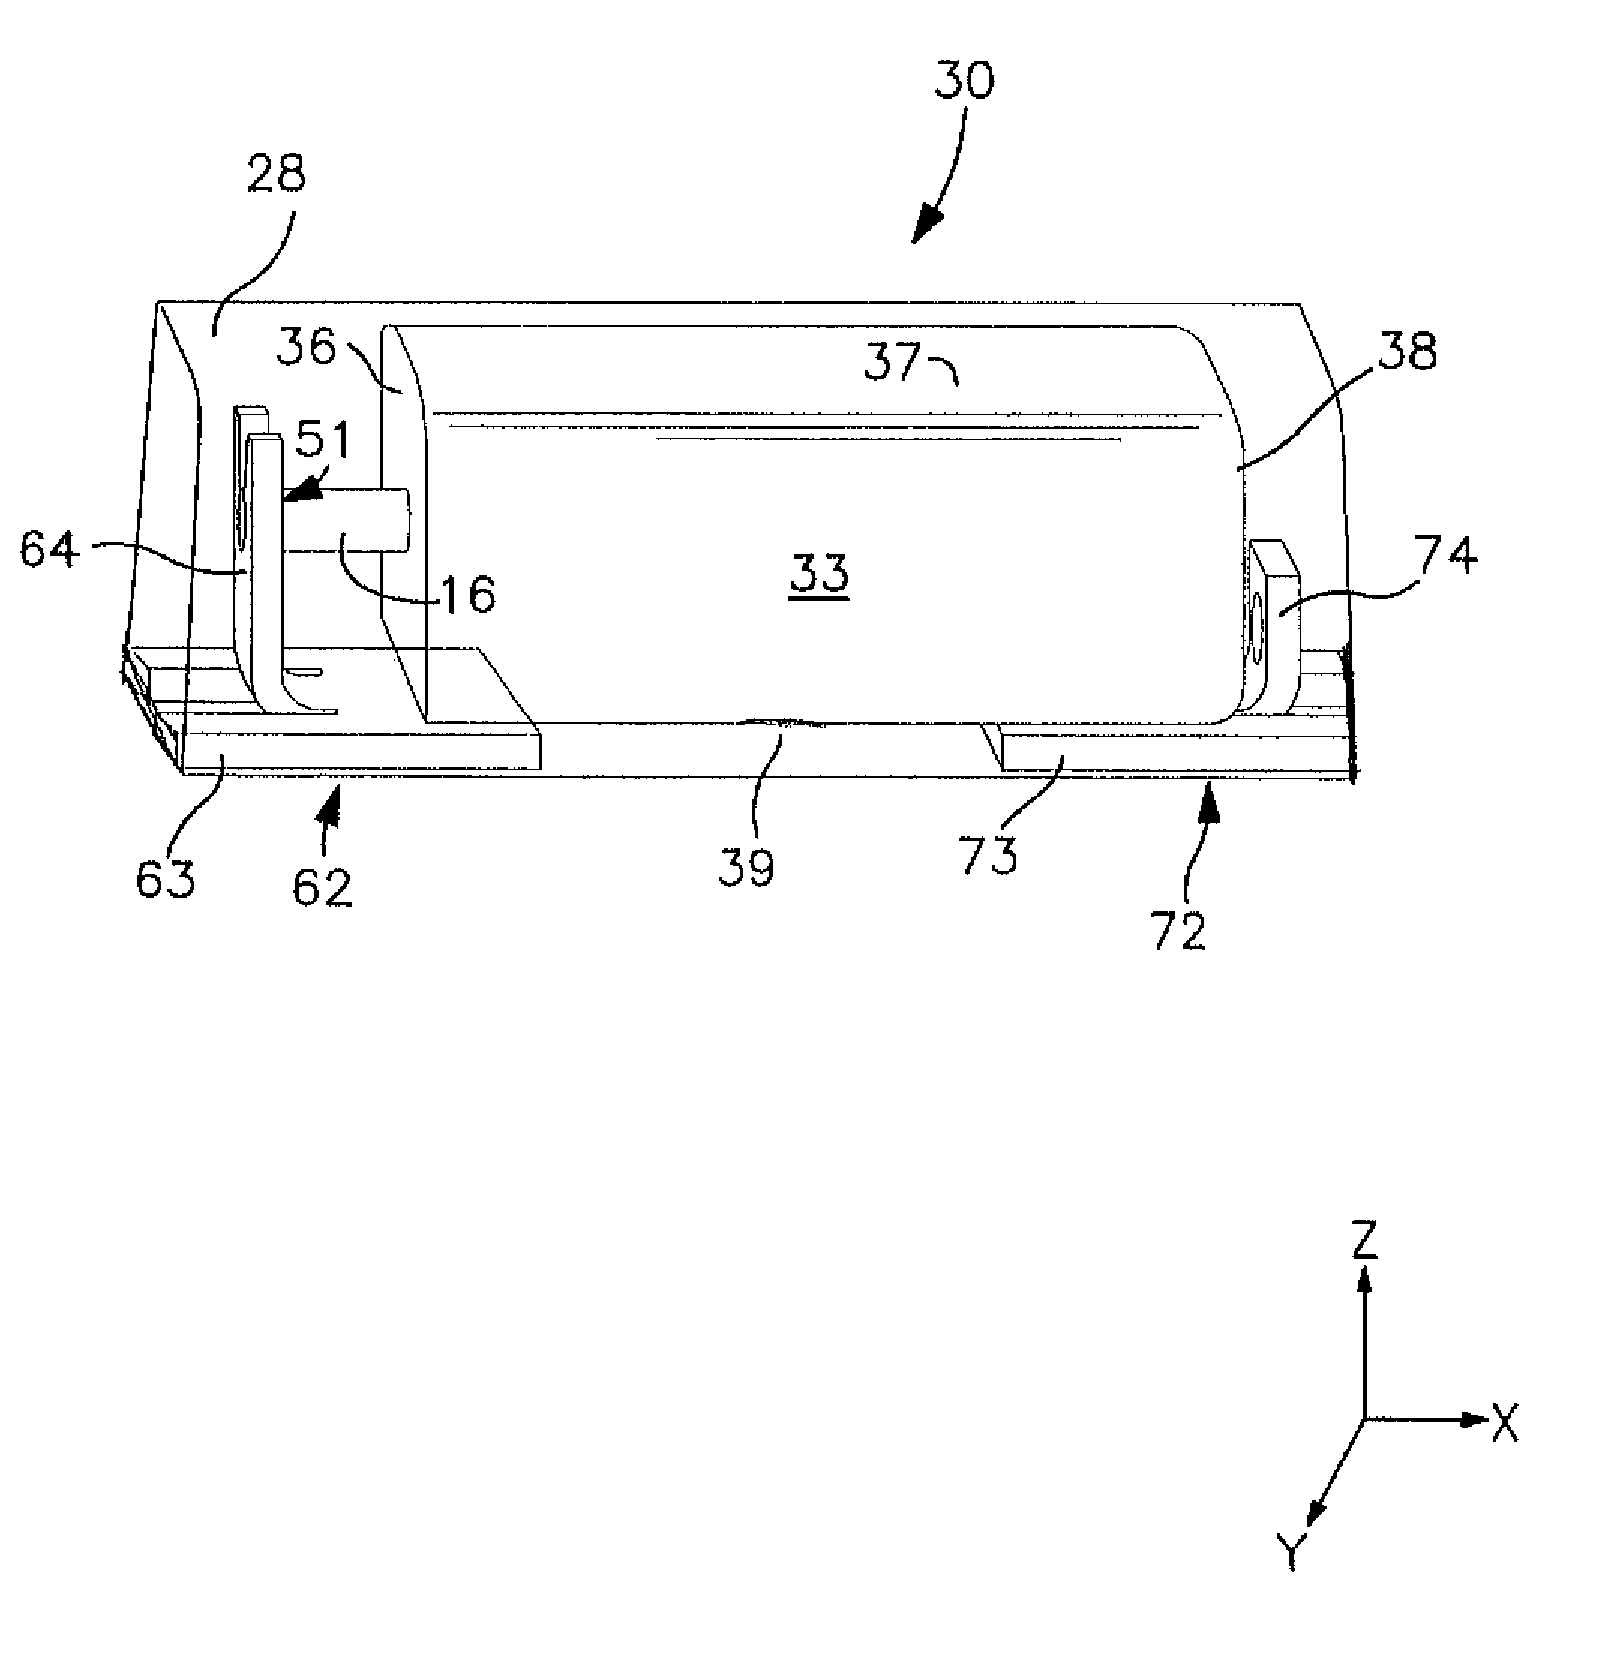 Capacitor Anode Formed From a Powder Containing Coarse Agglomerates and Fine Agglomerates